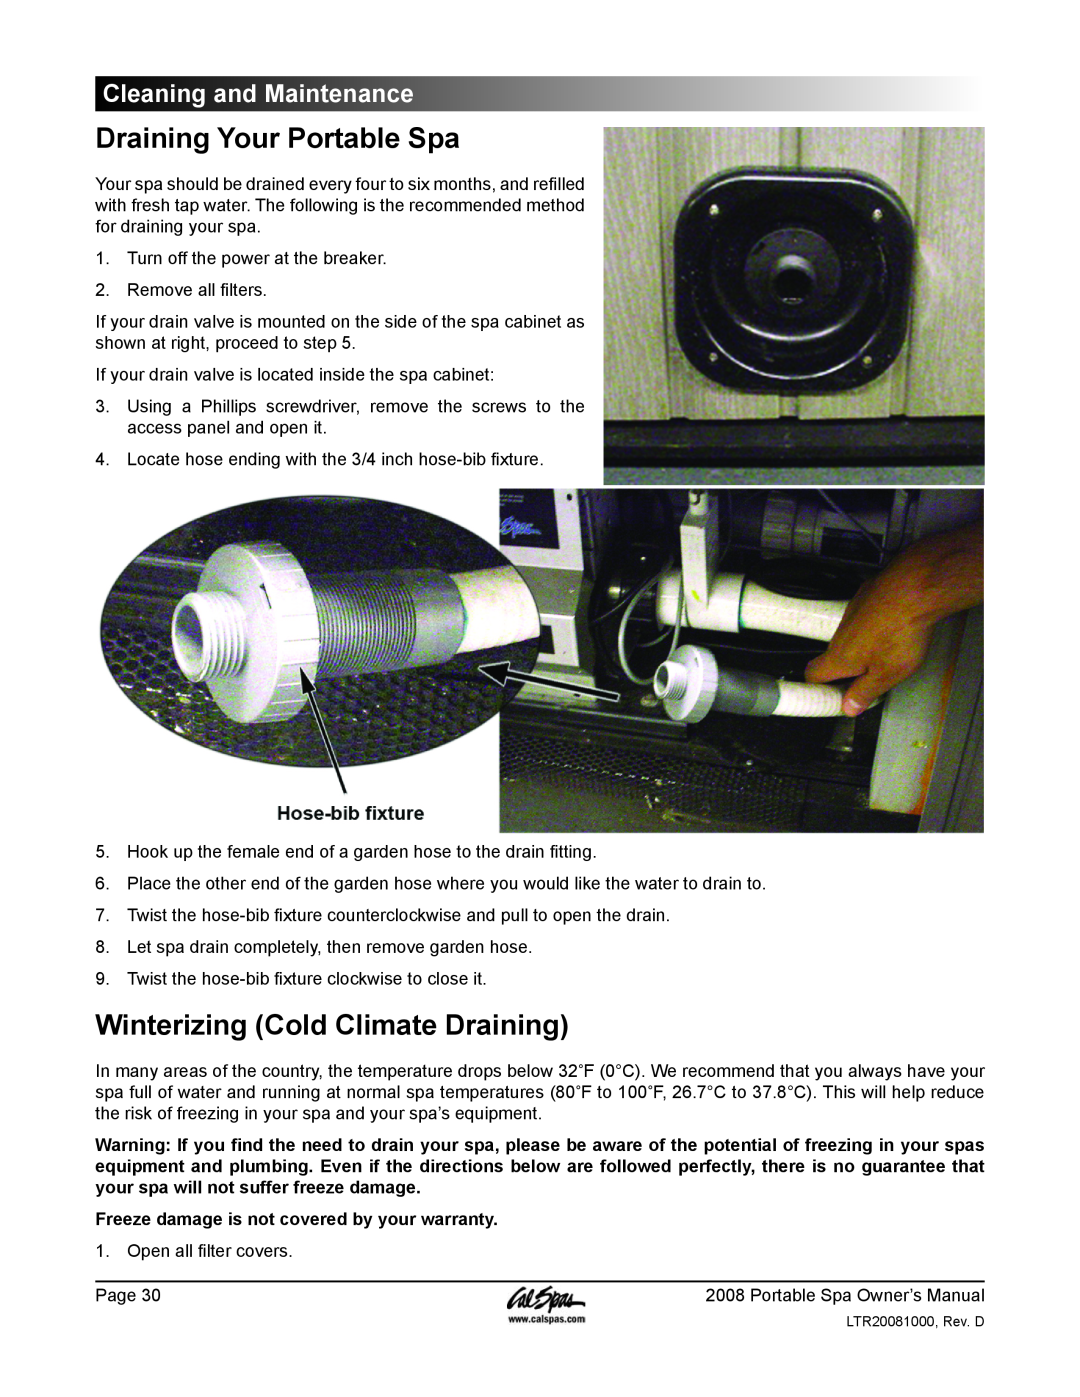 Cal Spas GFCI manual Draining Your Portable Spa, Winterizing Cold Climate Draining, Cleaning and Maintenance 